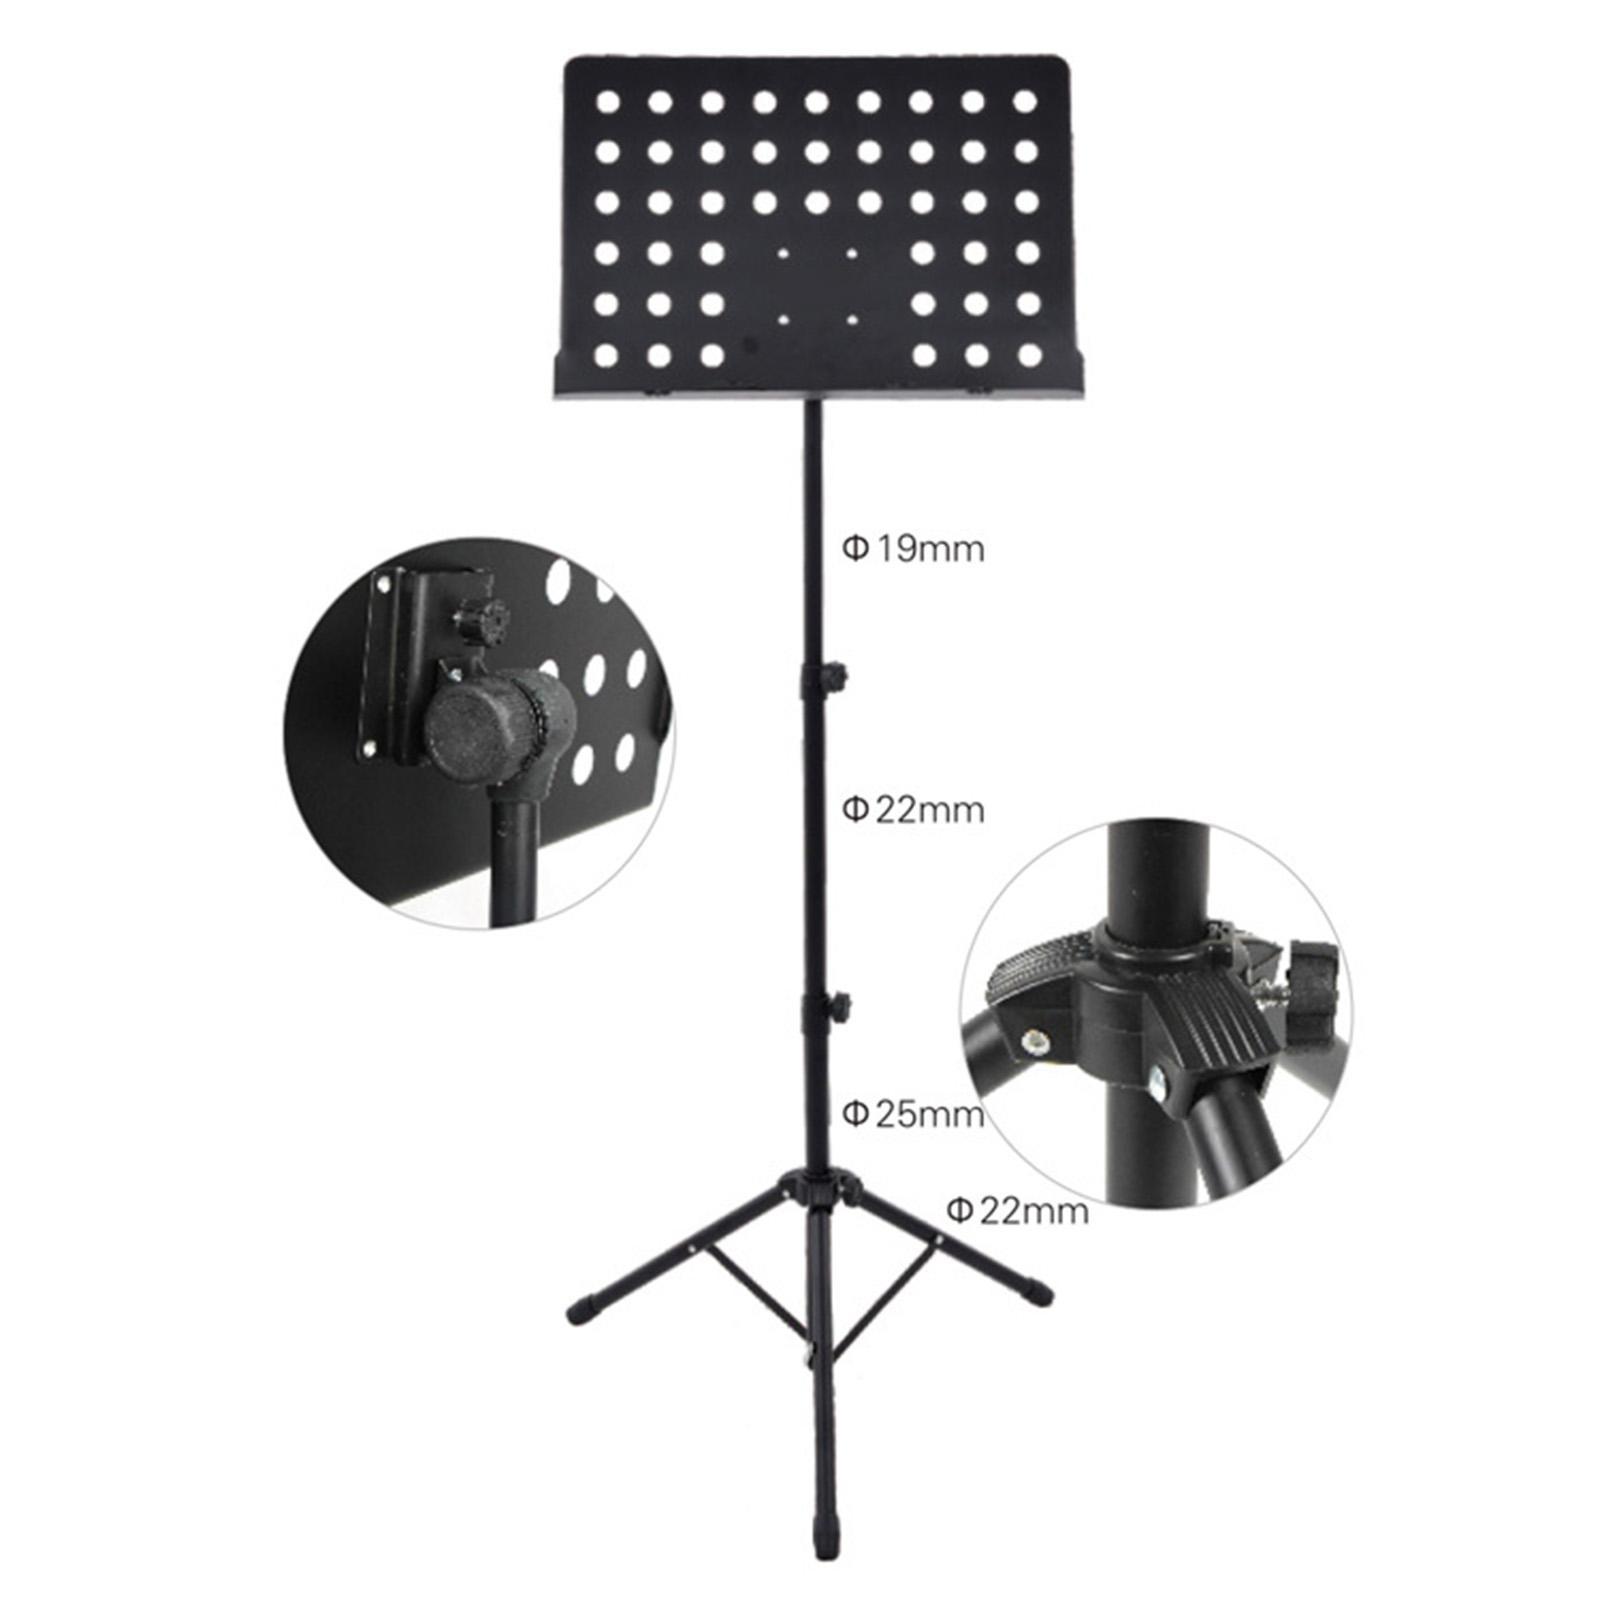 Foldable Sheet Music Stand Nonslip Stable Height Adjustable